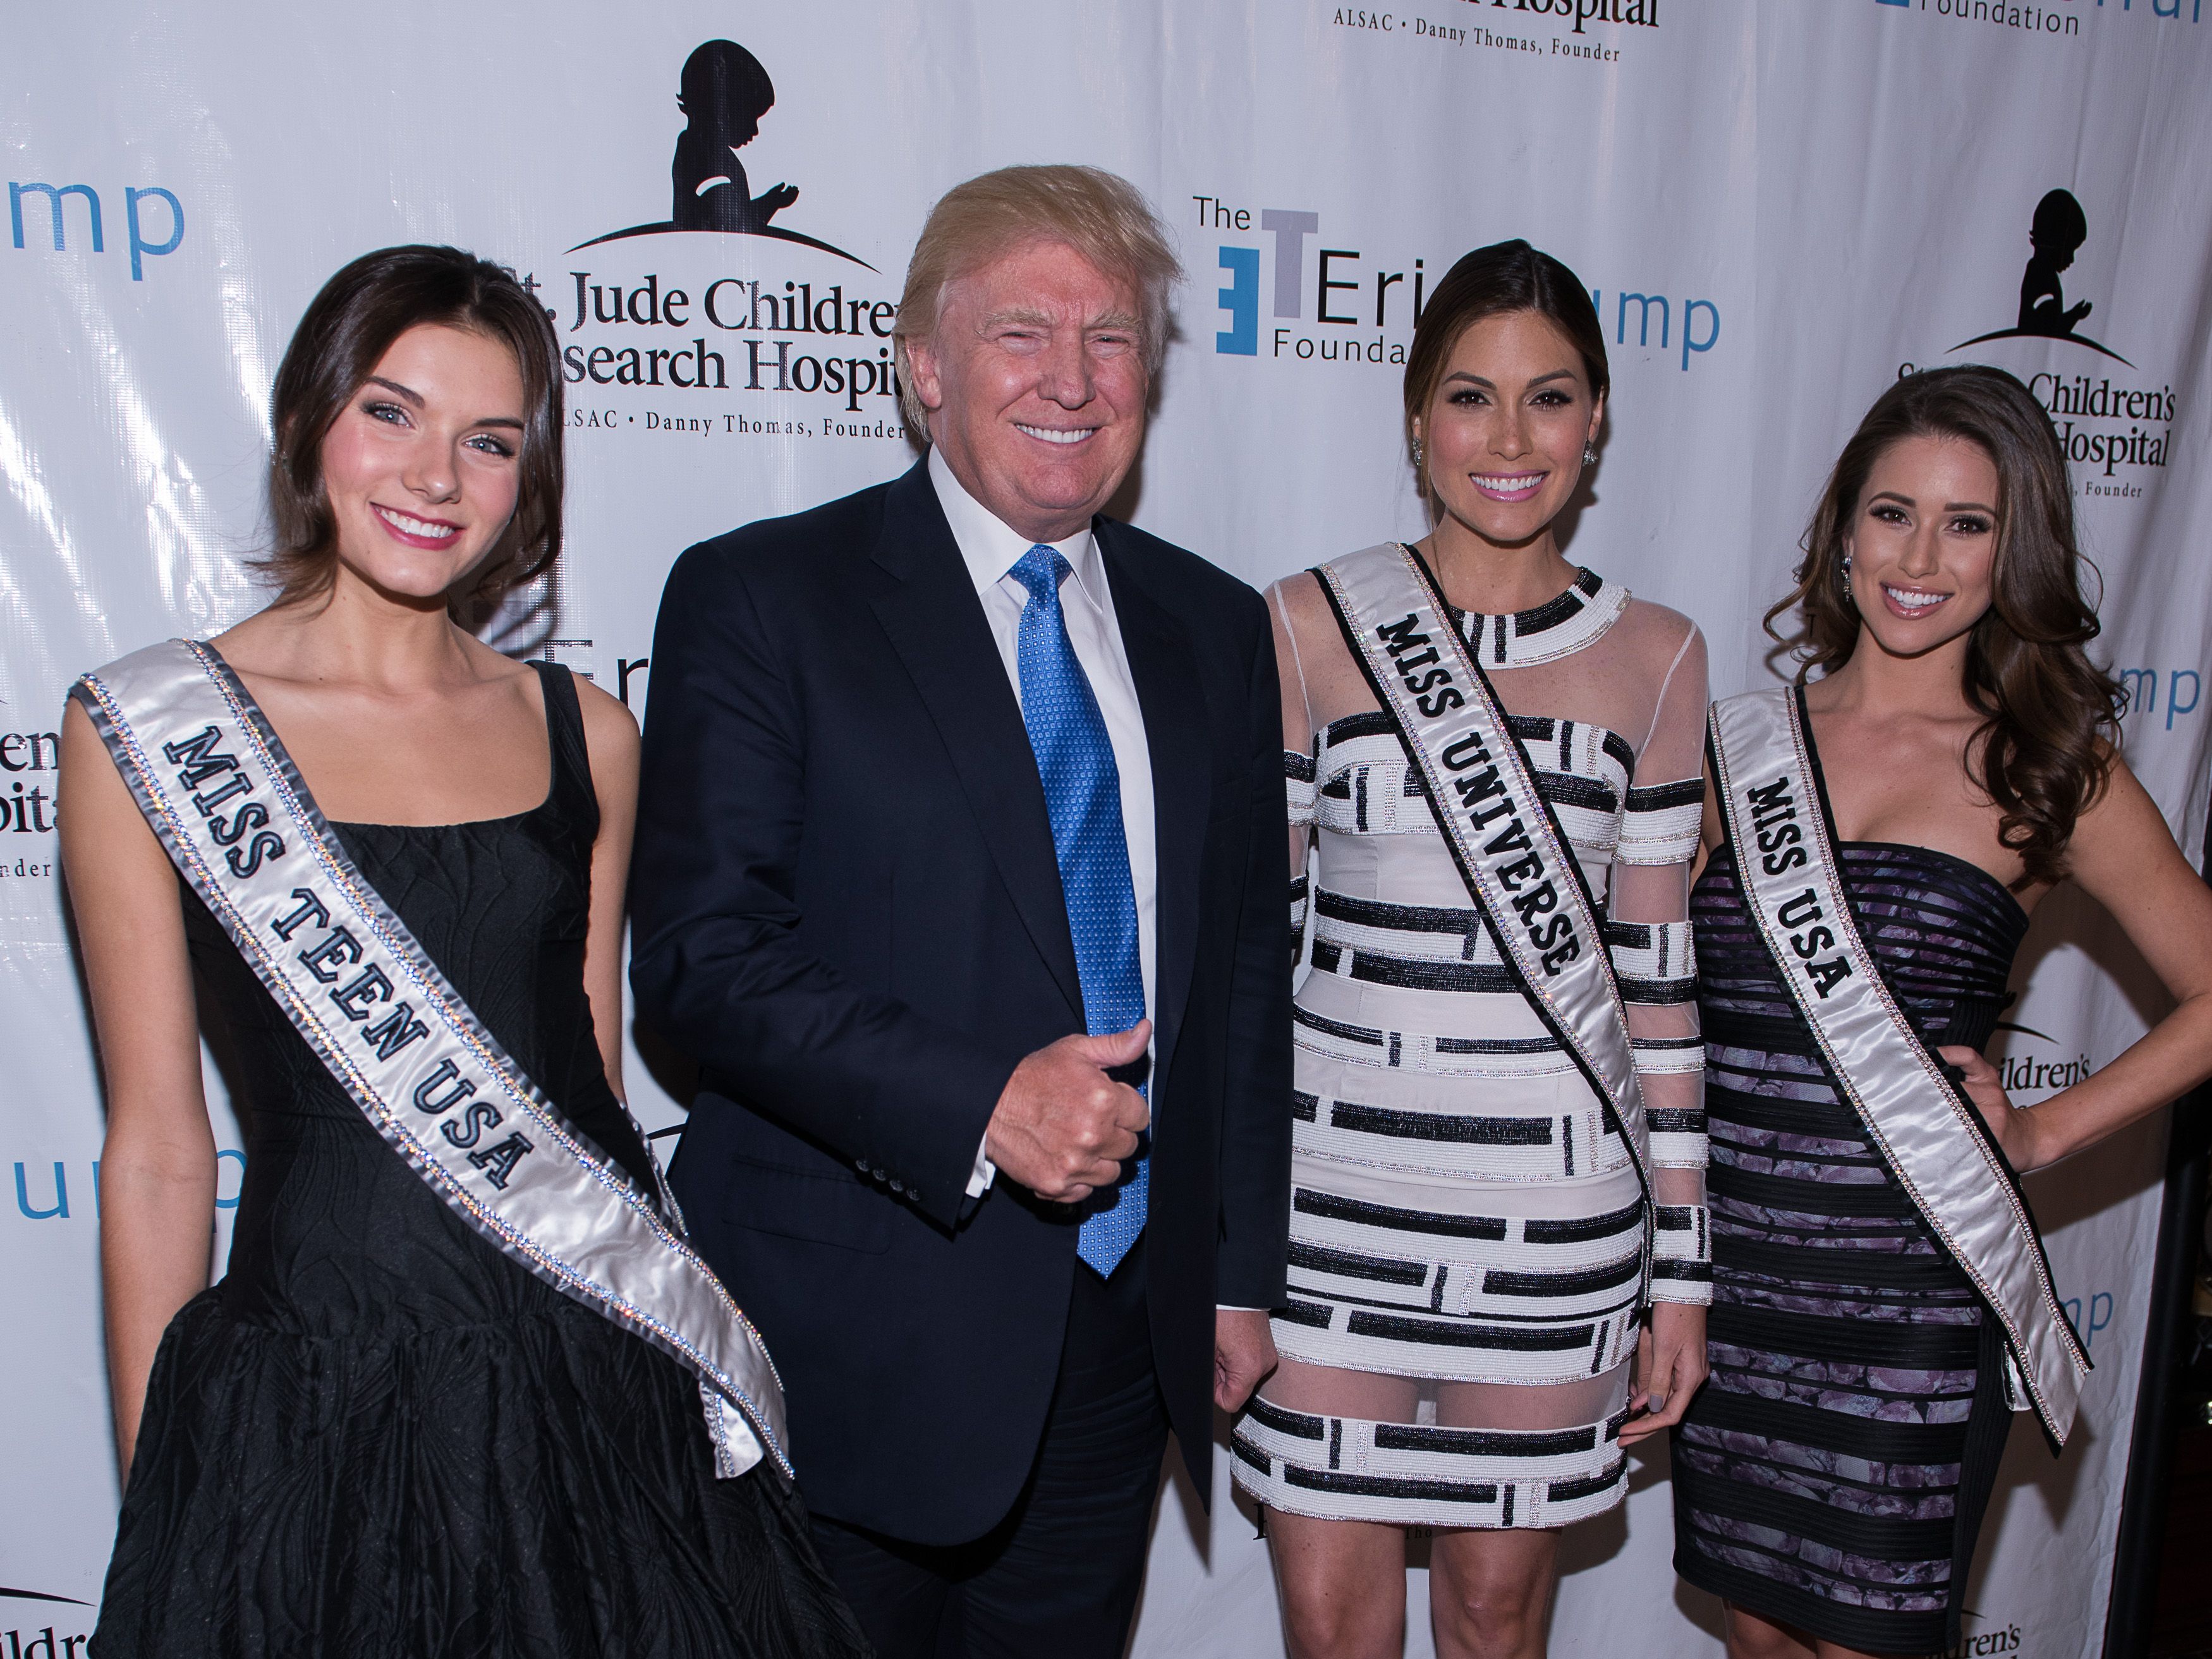 Donald Trump gives thumbs up while posing with beauty pageant winners. 